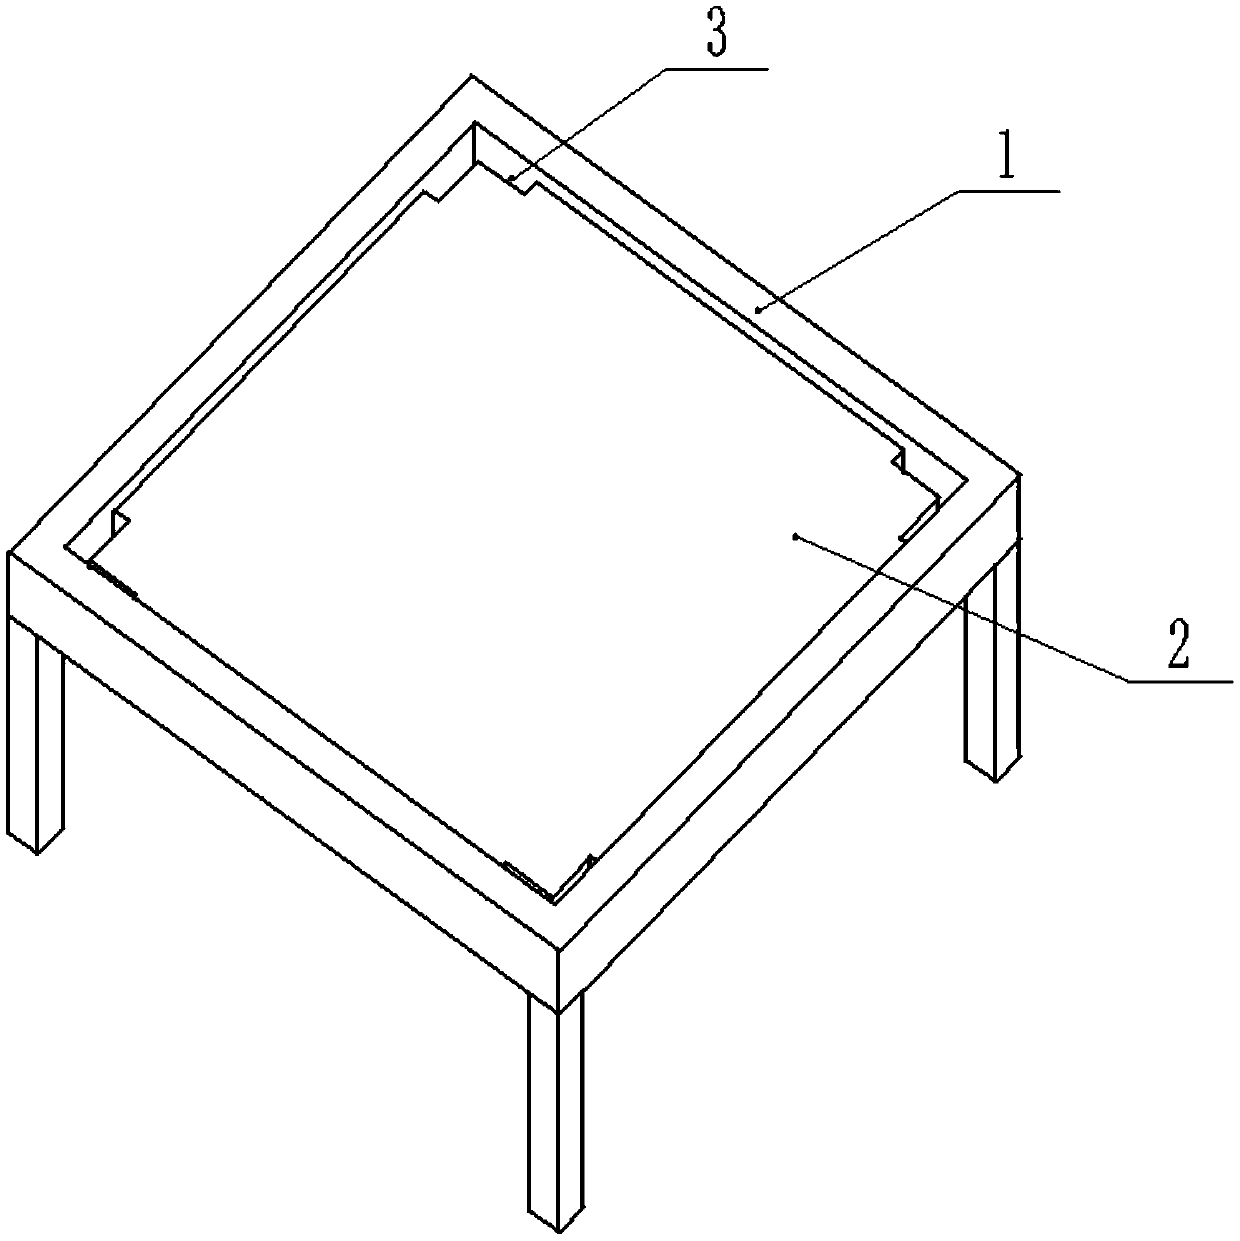 Reinforced concrete frame structure